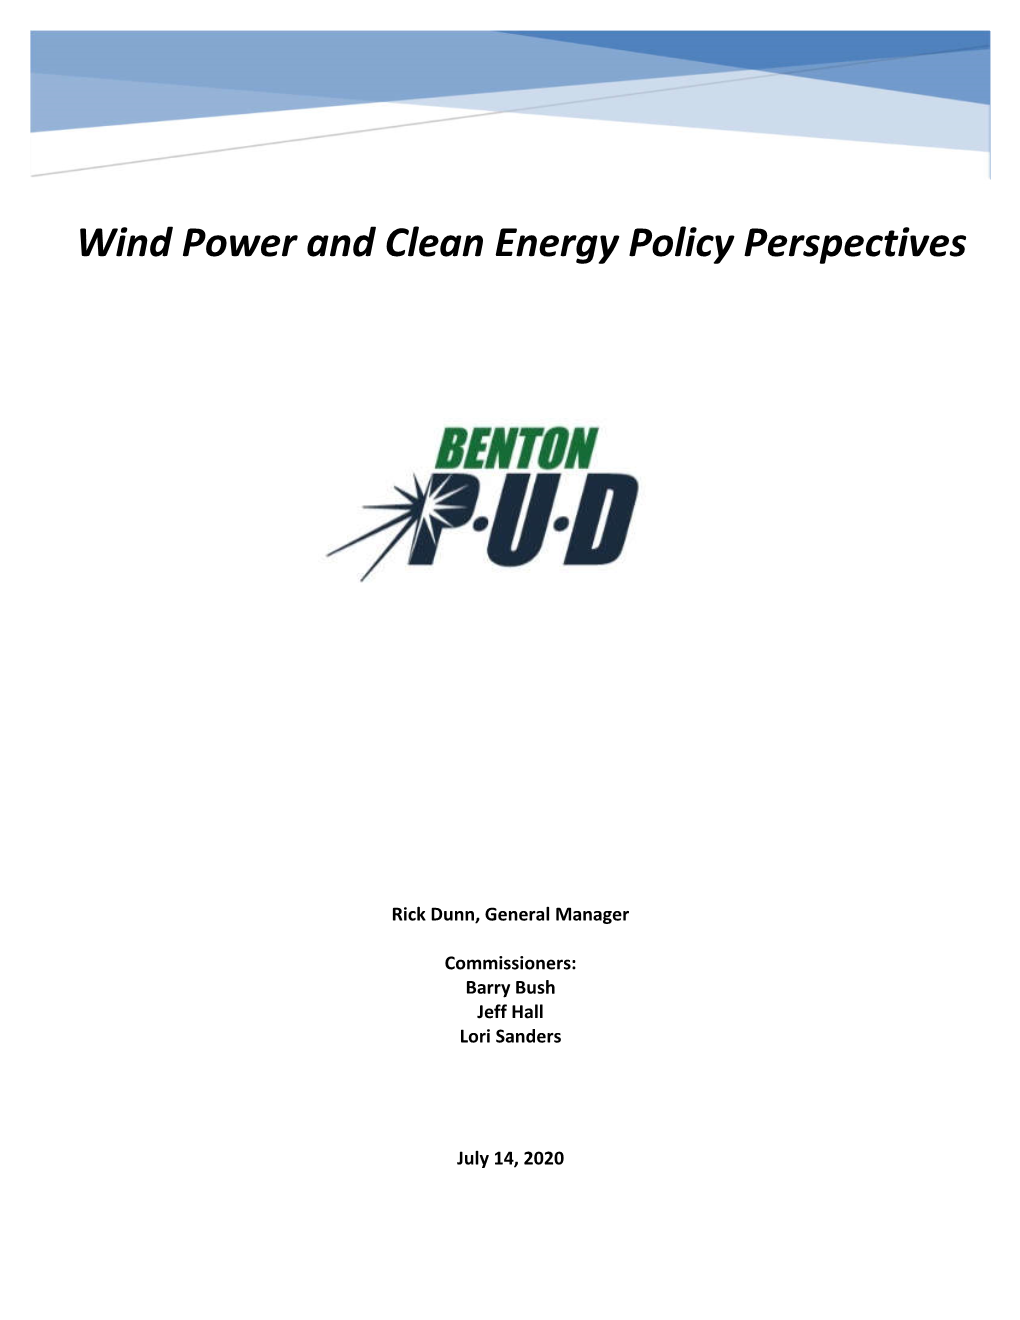 Wind Power and Clean Energy Policy Perspectives